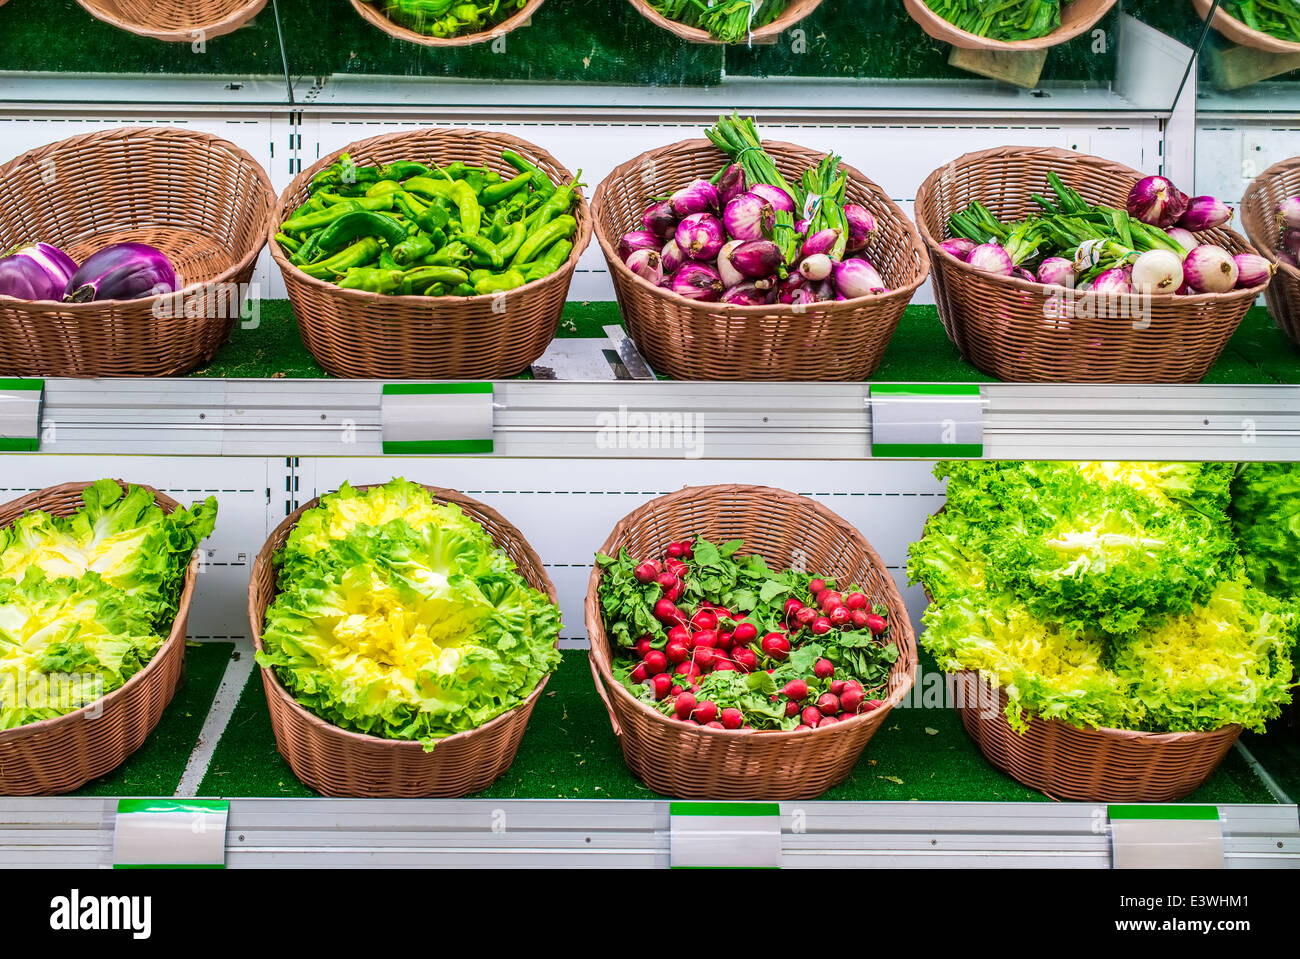 Fruits and vegetables on a supermarket shelf. Stock Photo